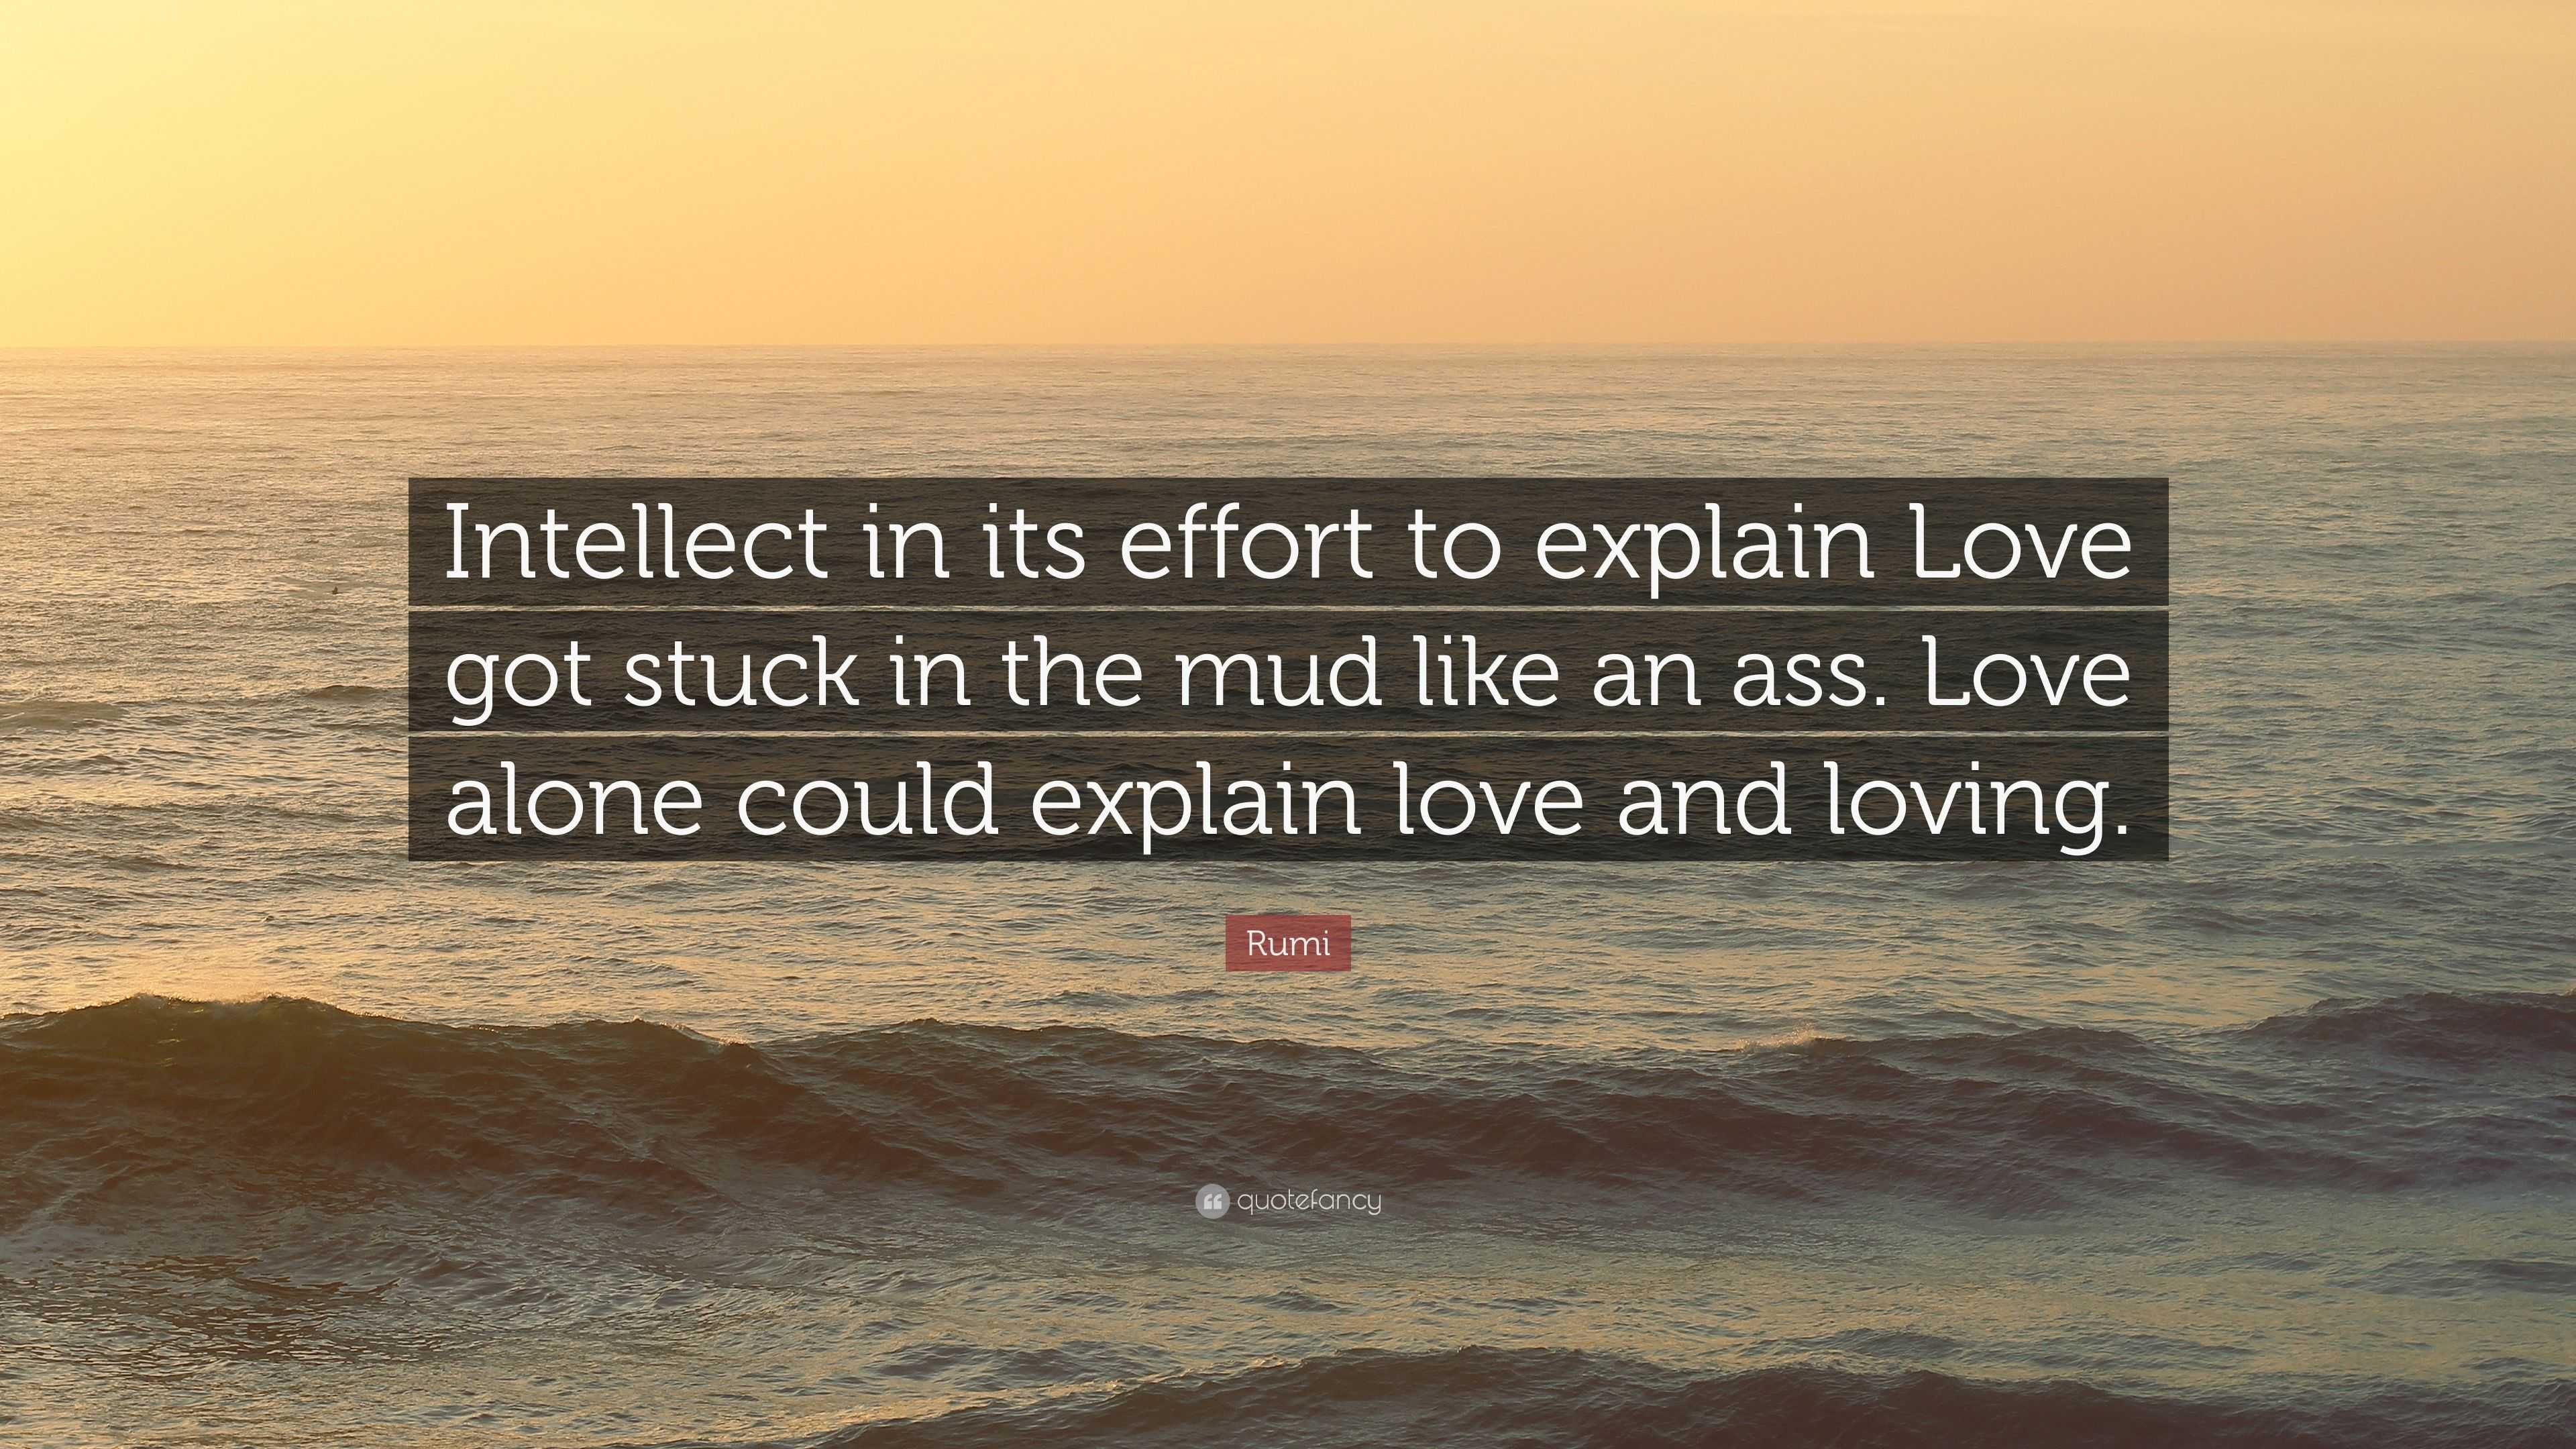 Rumi Quote “Intellect in its effort to explain Love got stuck in the mud